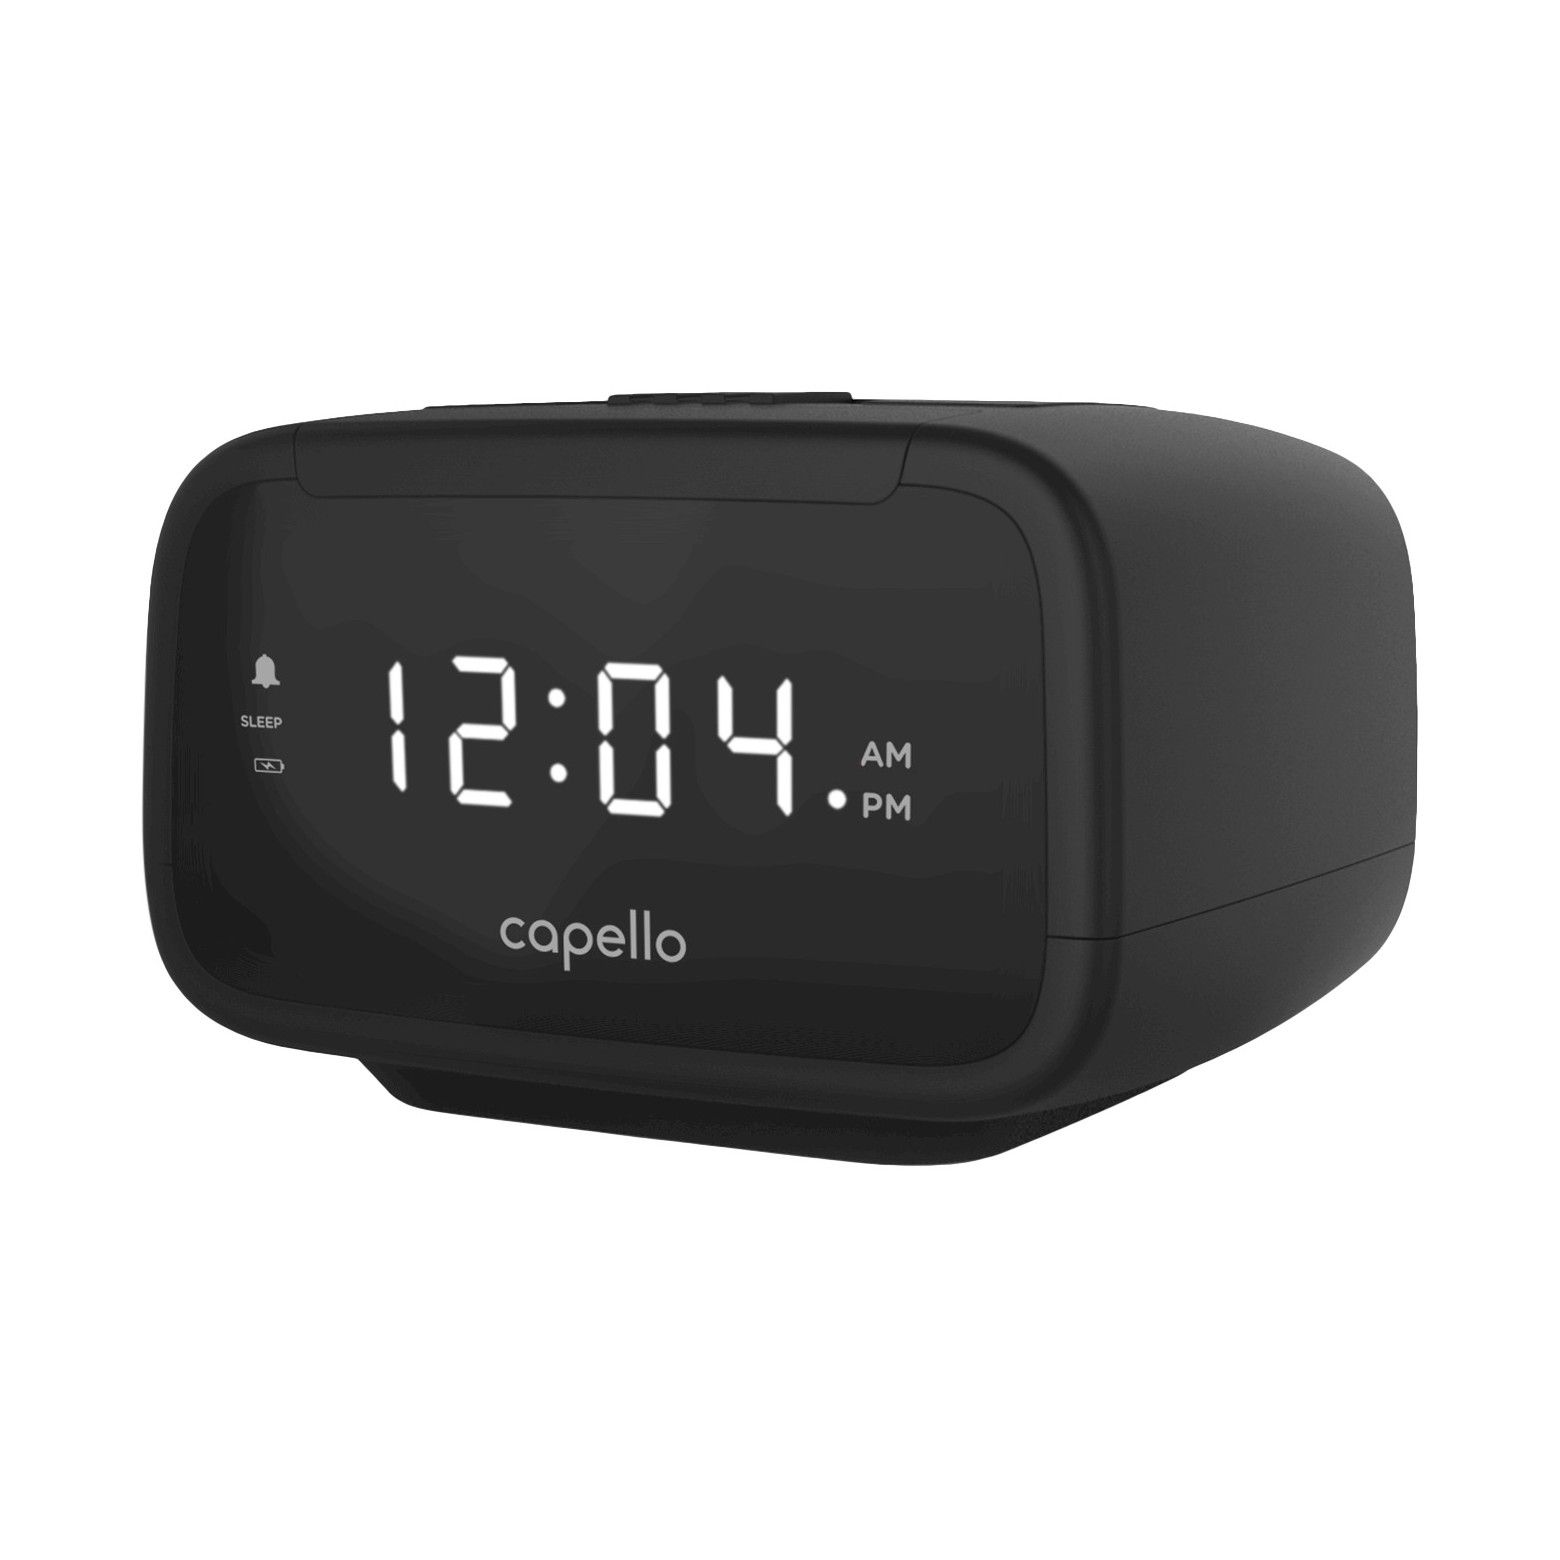 How To Set Time On A Capello Alarm Clock